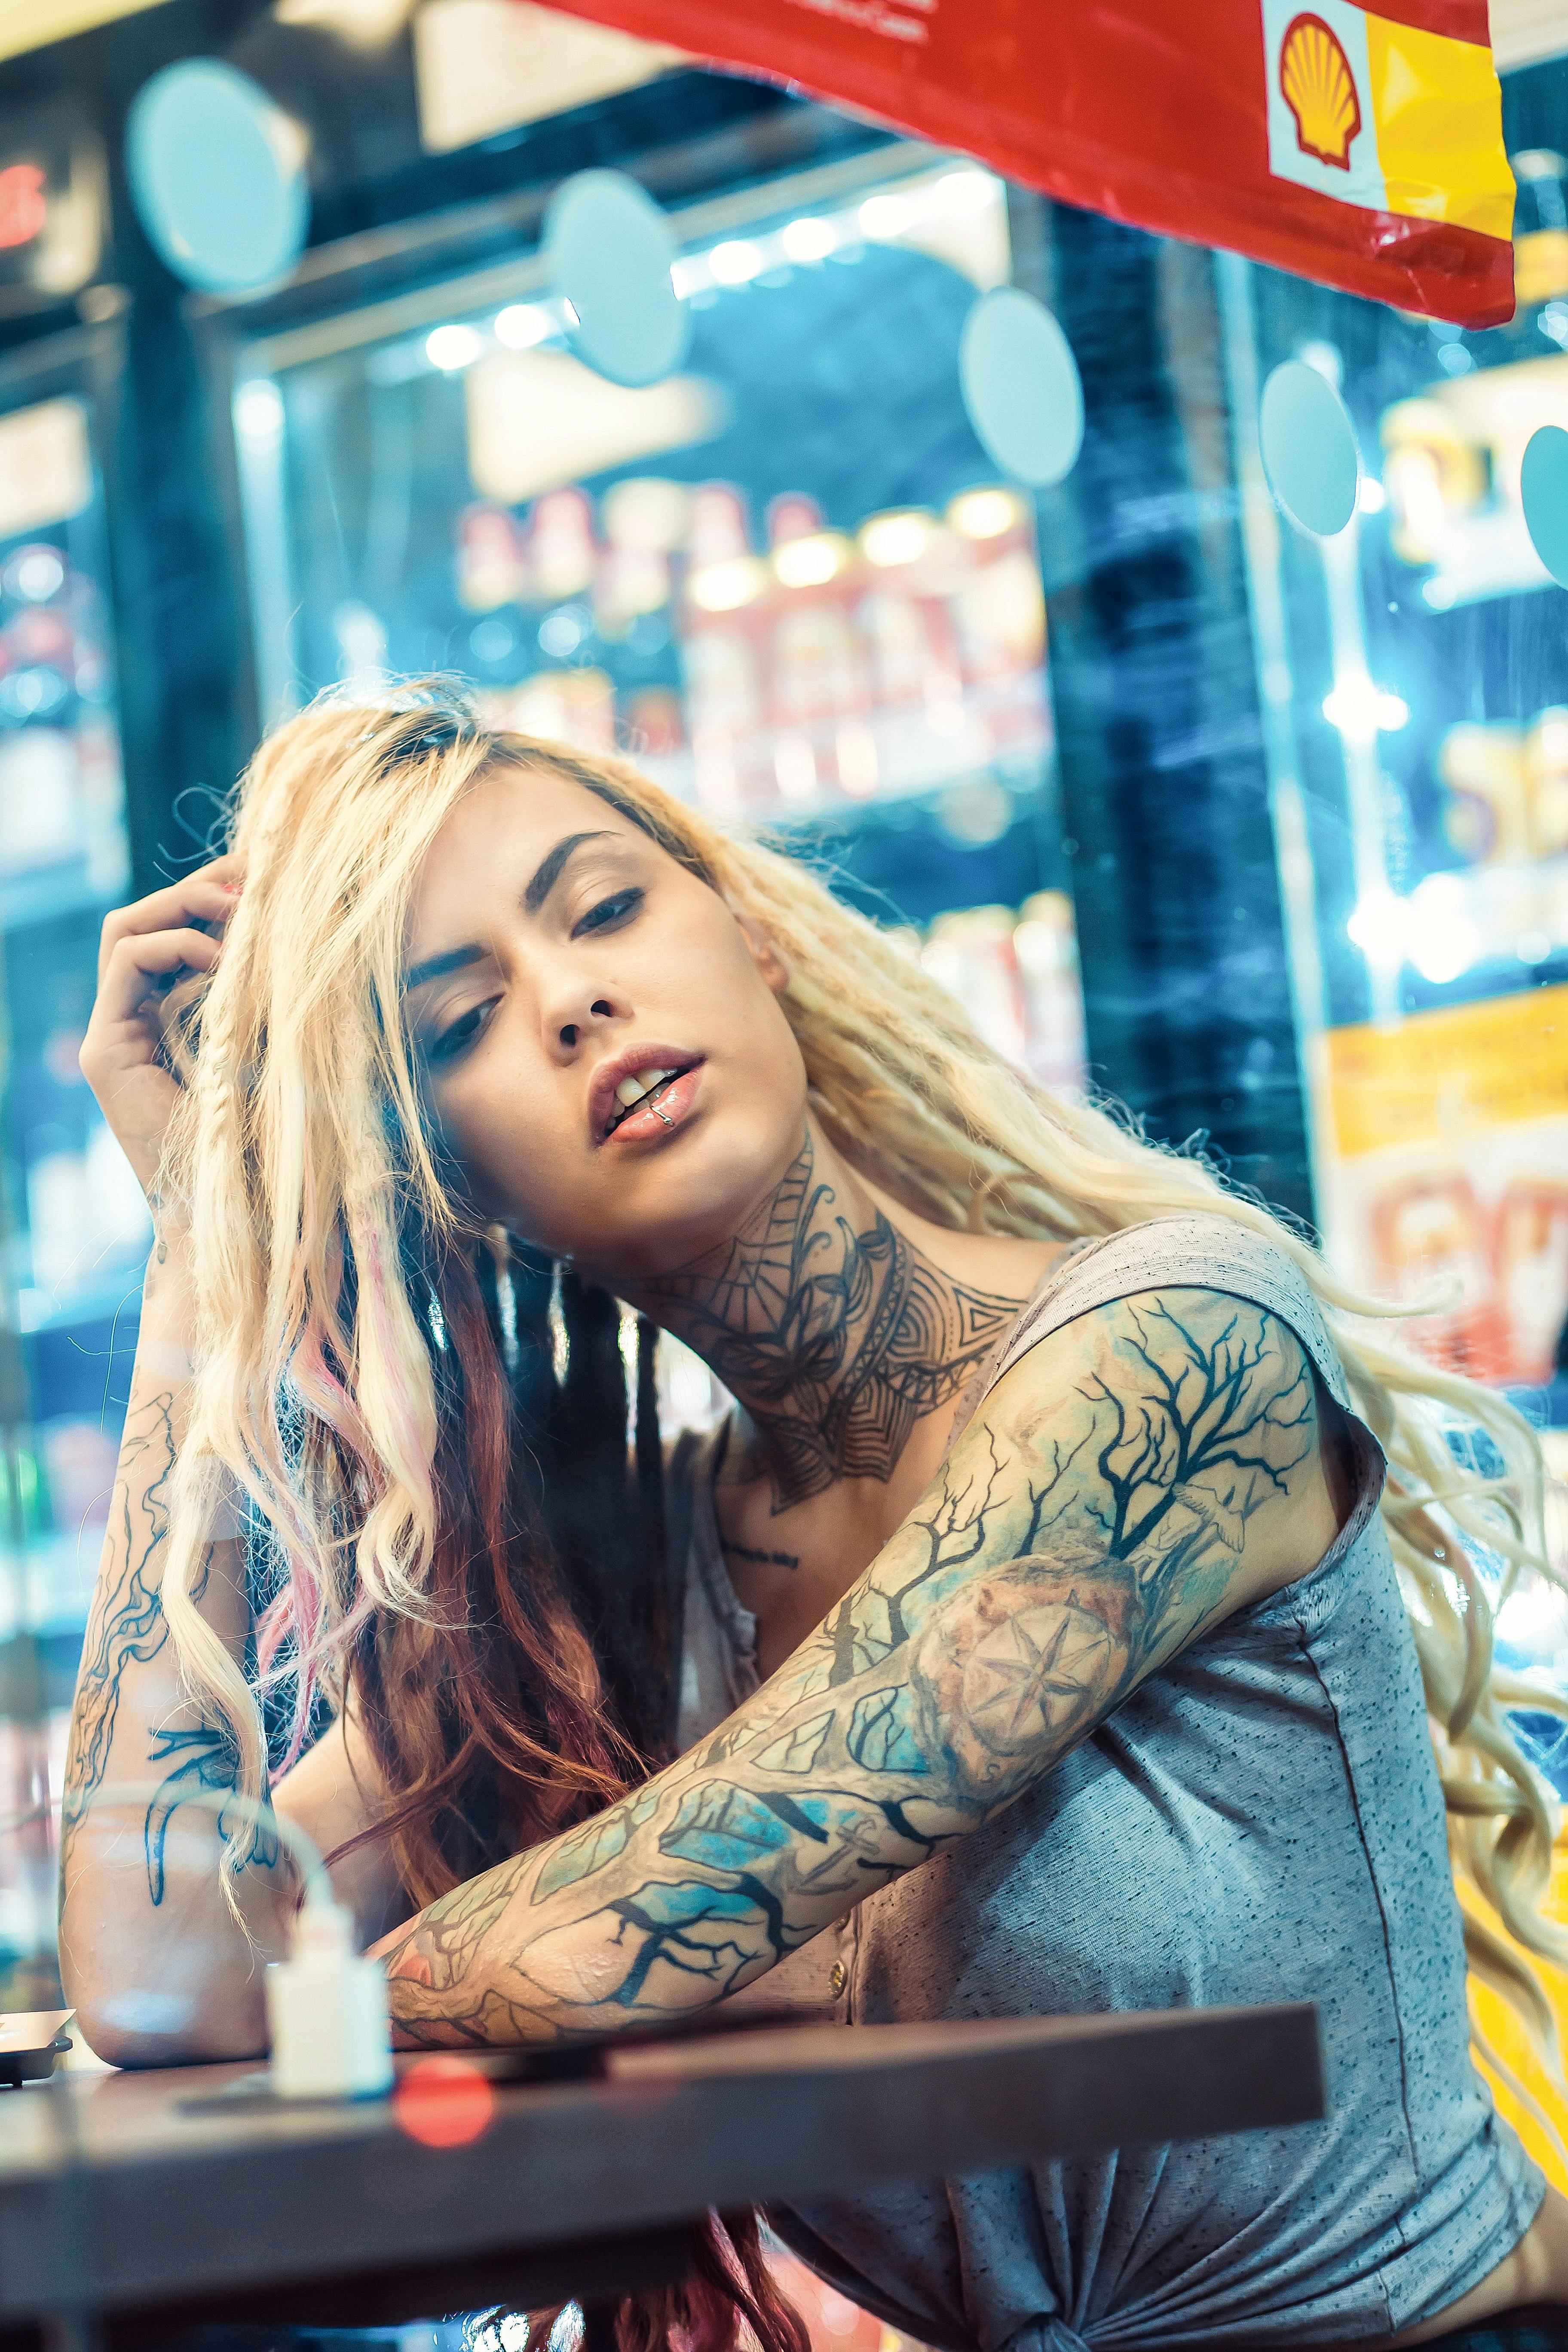 Tattoos Photos, Download The BEST Free Tattoos Stock Photos & HD Images